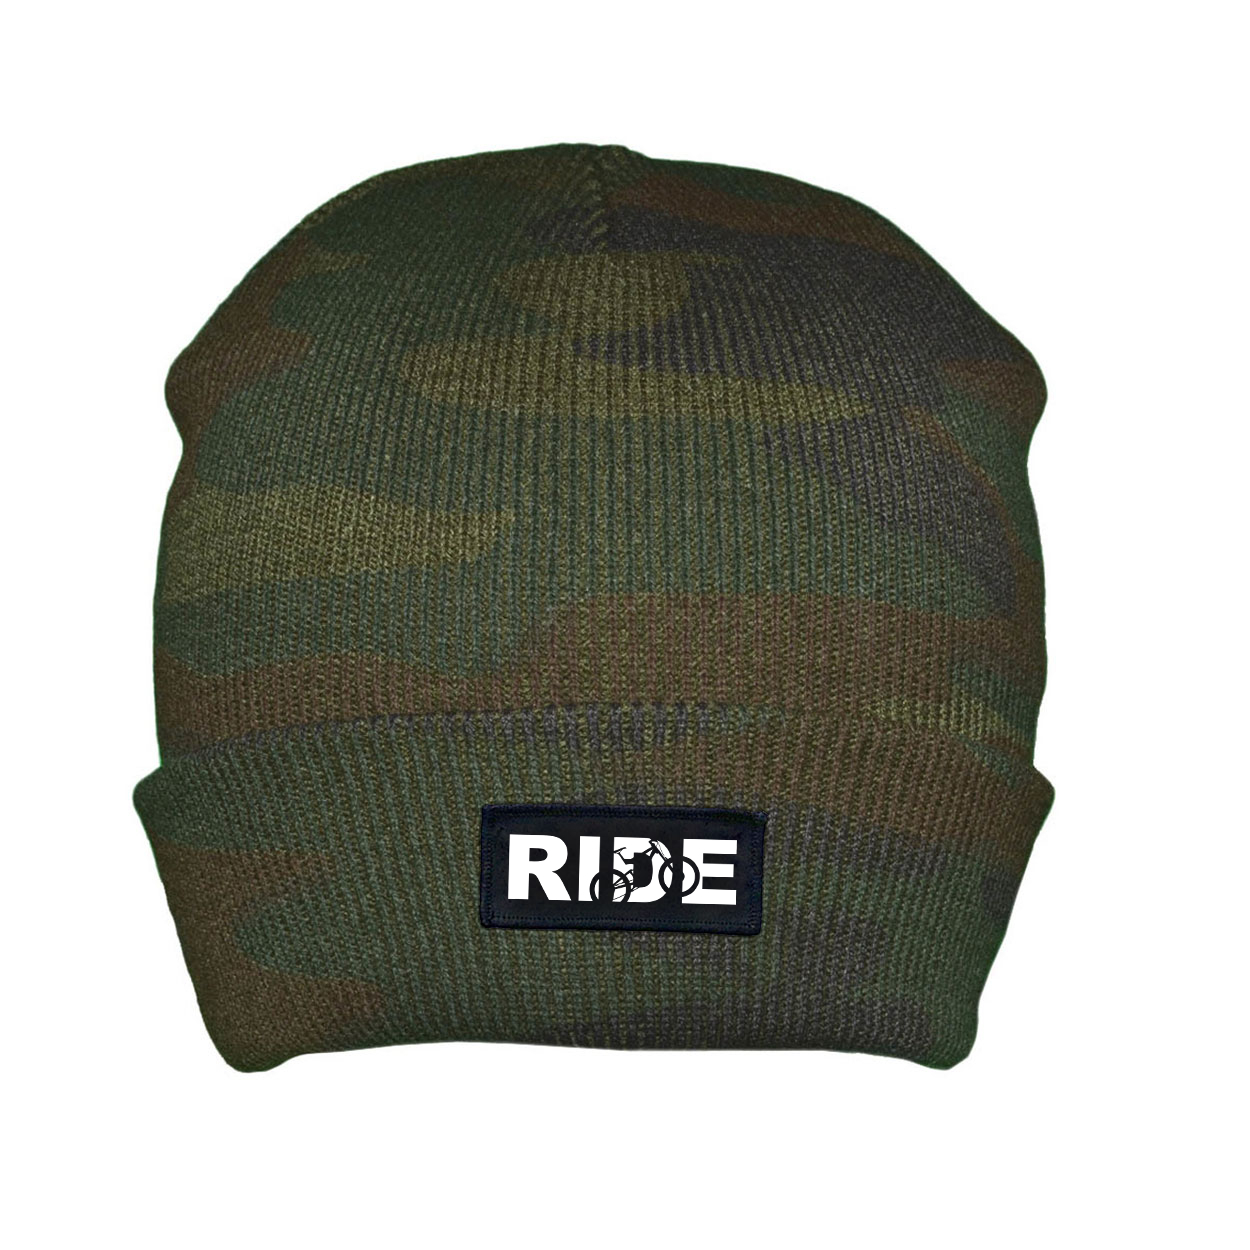 Ride MTB Logo Night Out Woven Patch Roll Up Skully Beanie Camo (White Logo)